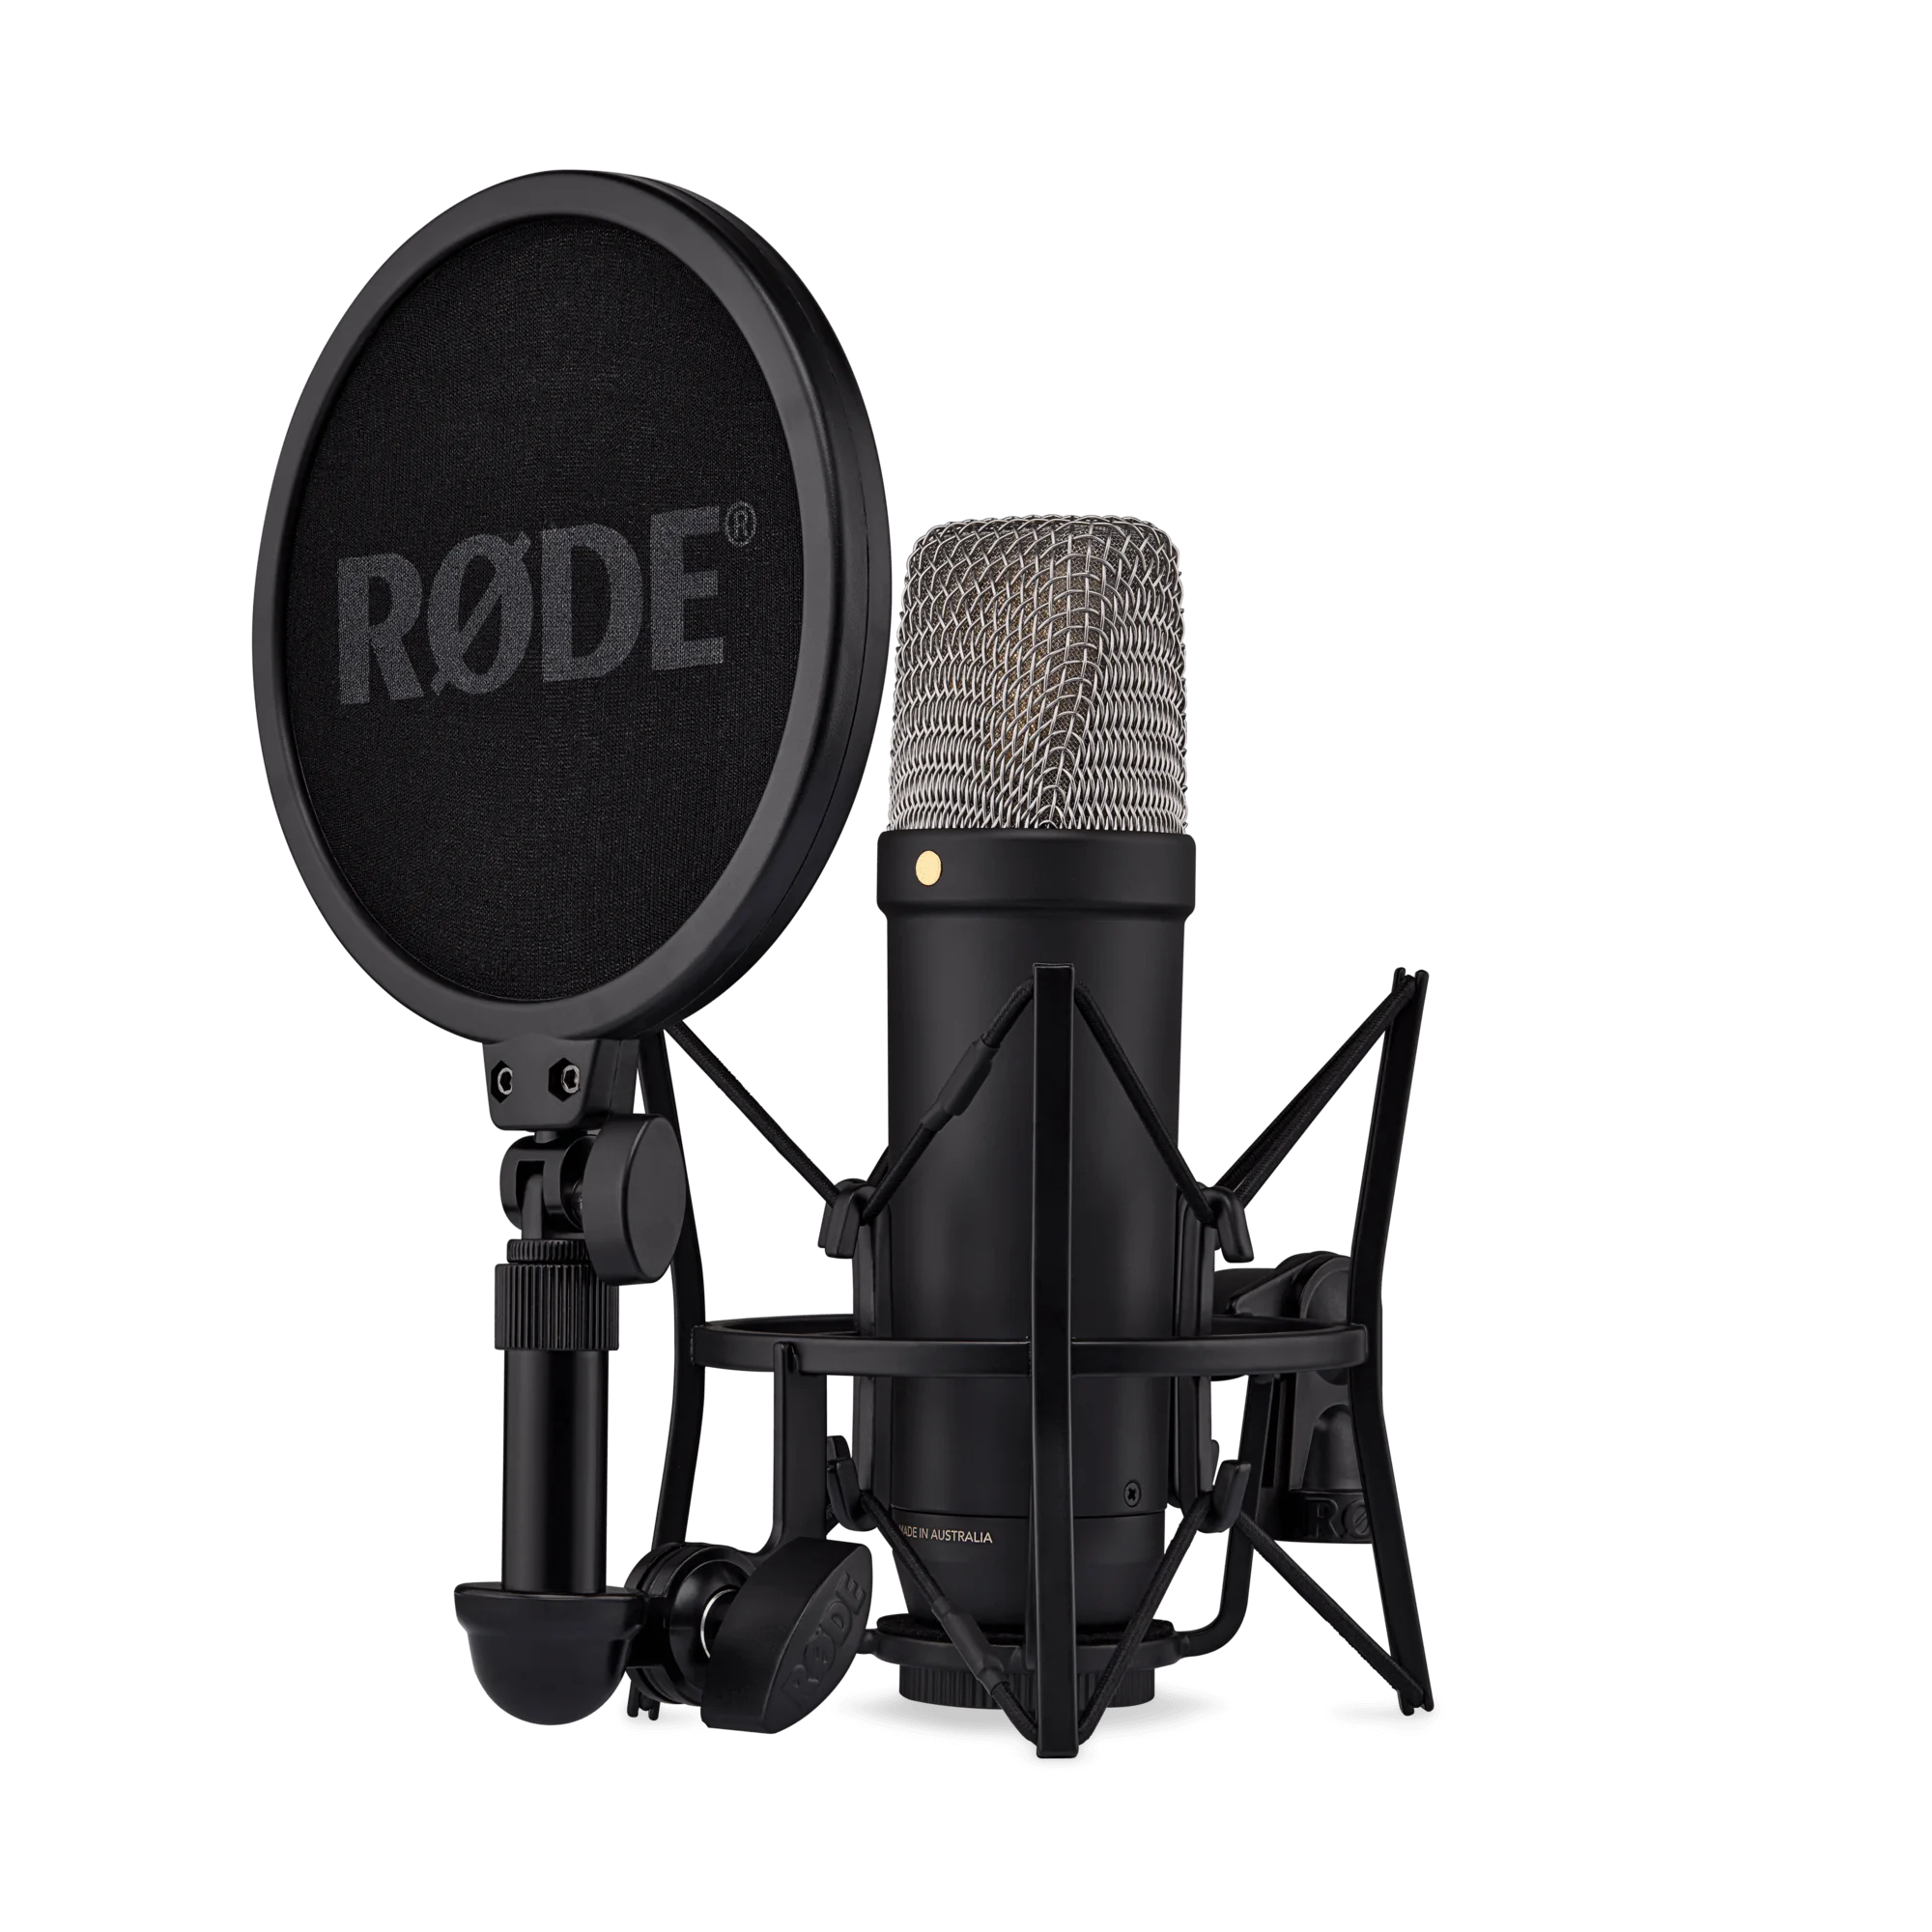 Rode nt1 5TH Large-diaphragm Cardioid Condenser Microphone large-diaphragm  (1-inch) gold-sputtered capsule for pop, rock - AliExpress